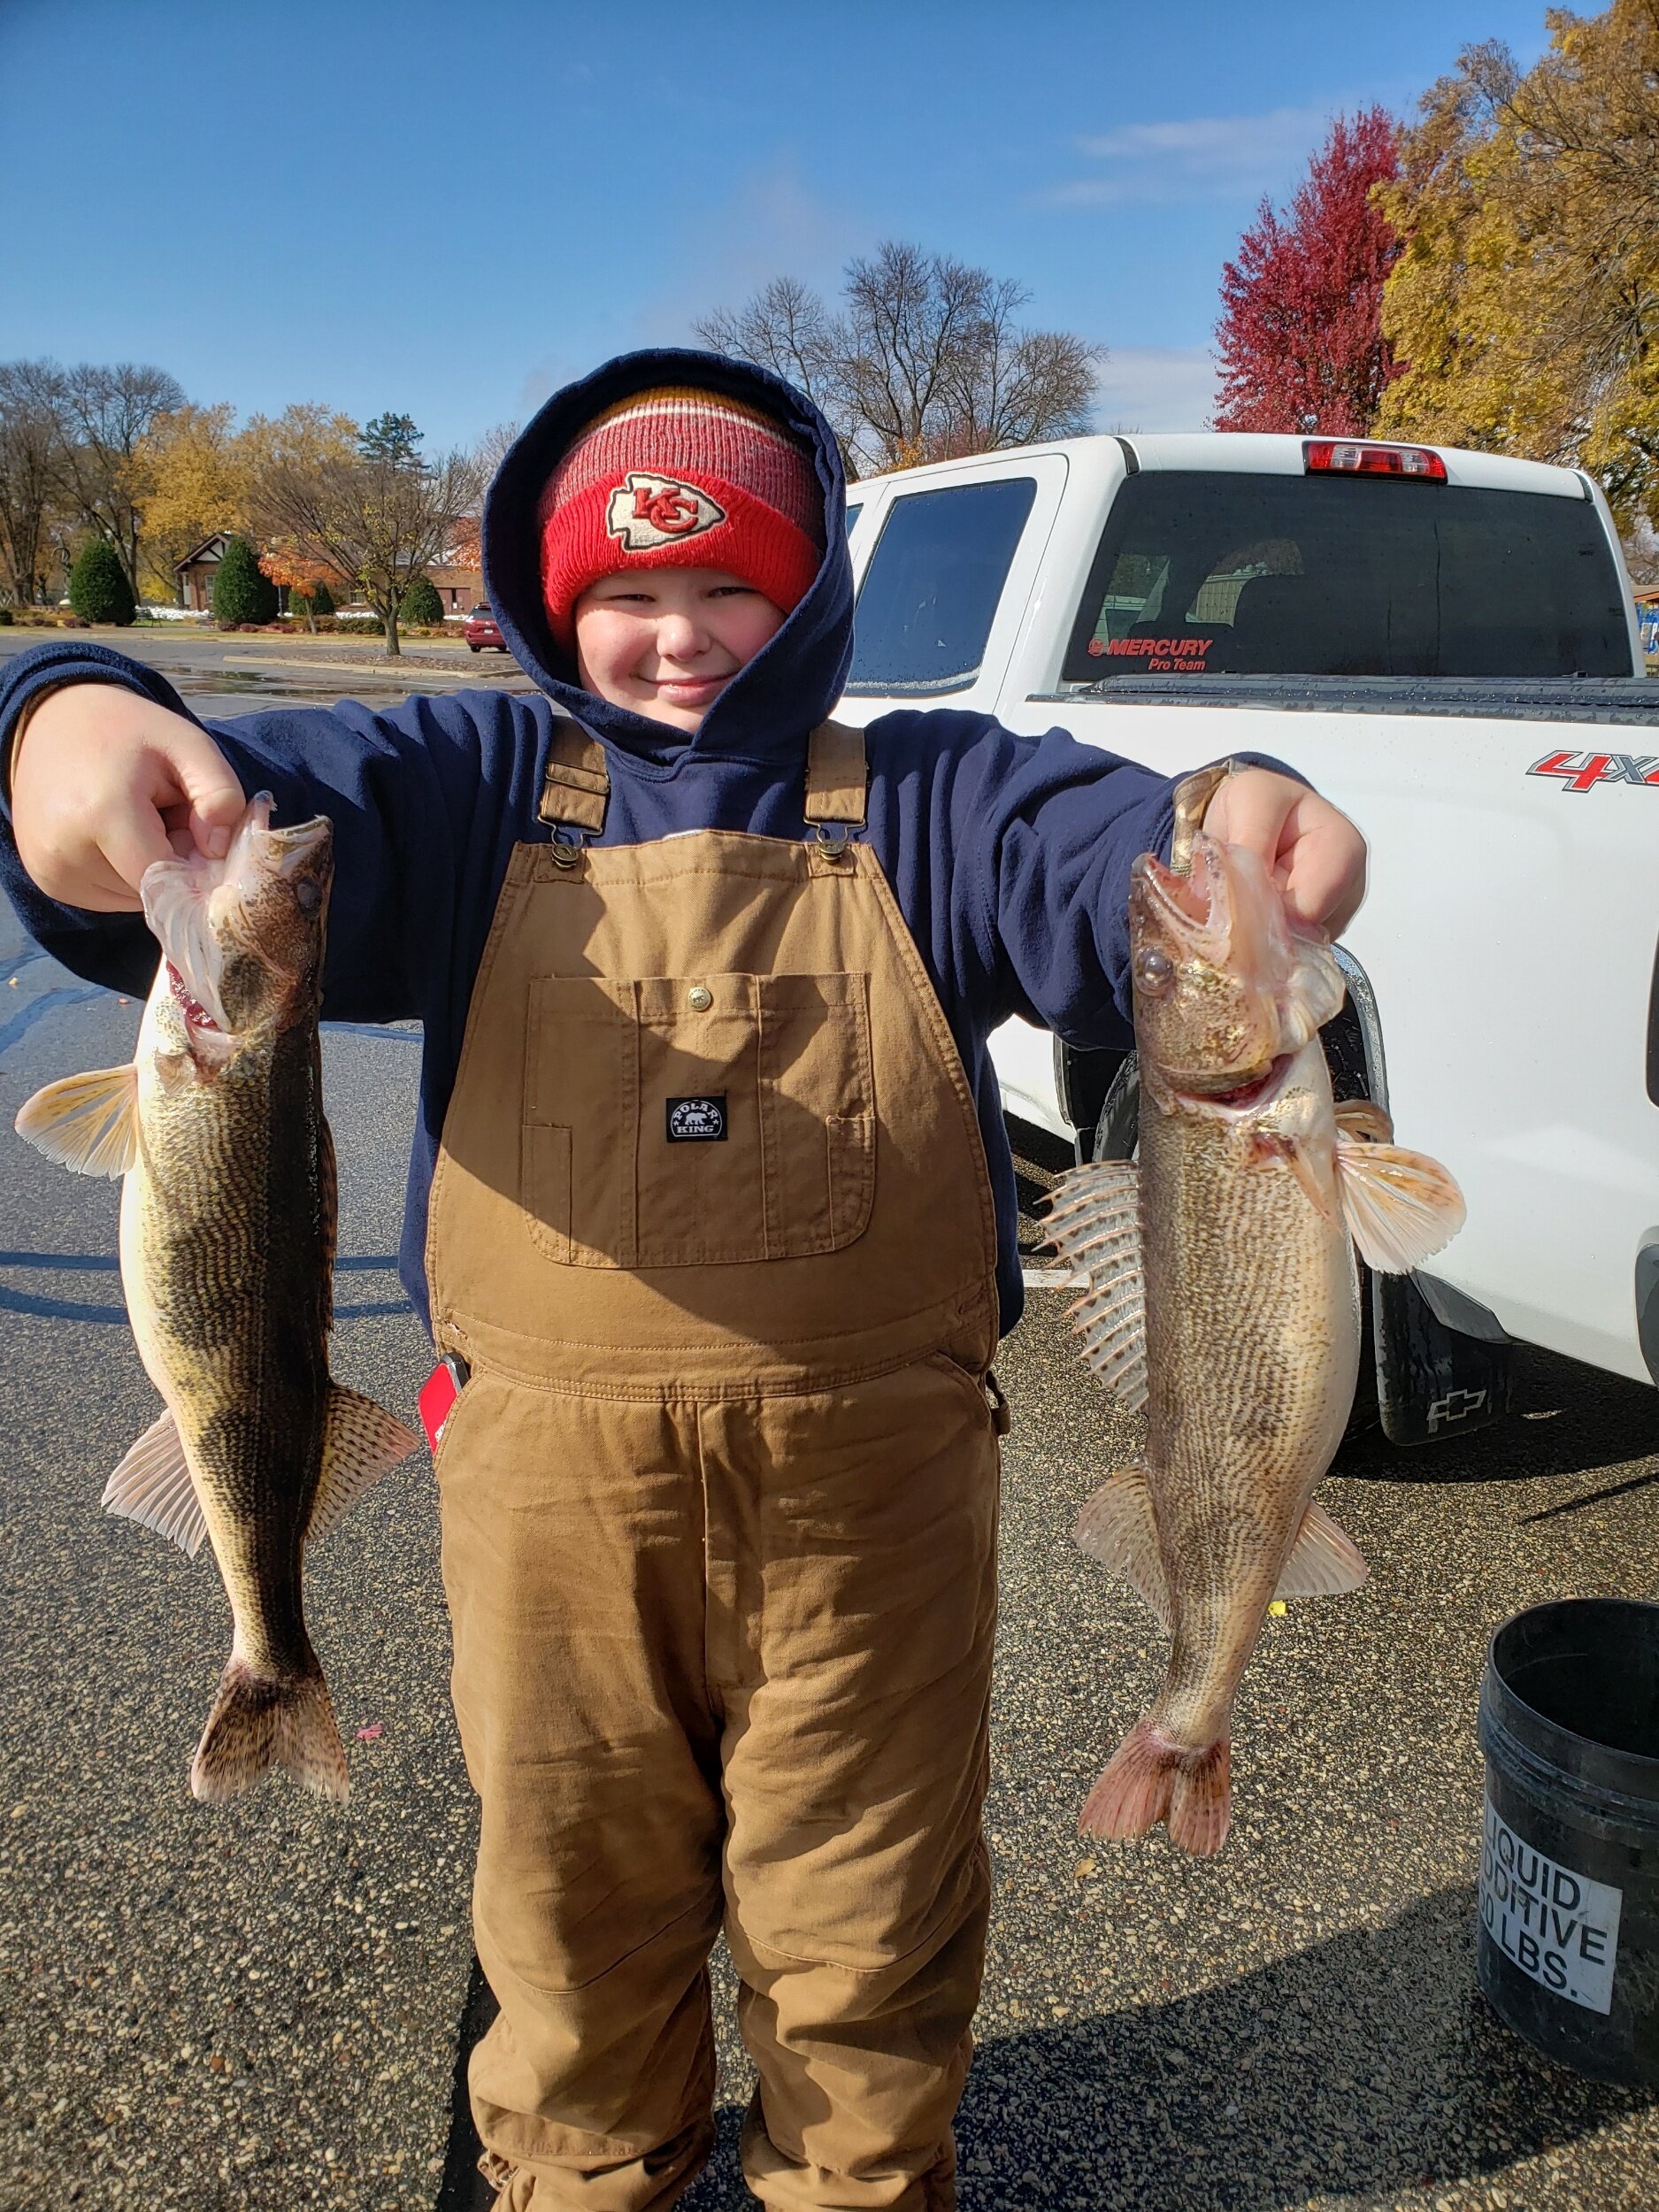 Home - Mississippi River Red Wing Lake Pepin Pool 4 and More Fishing Guides